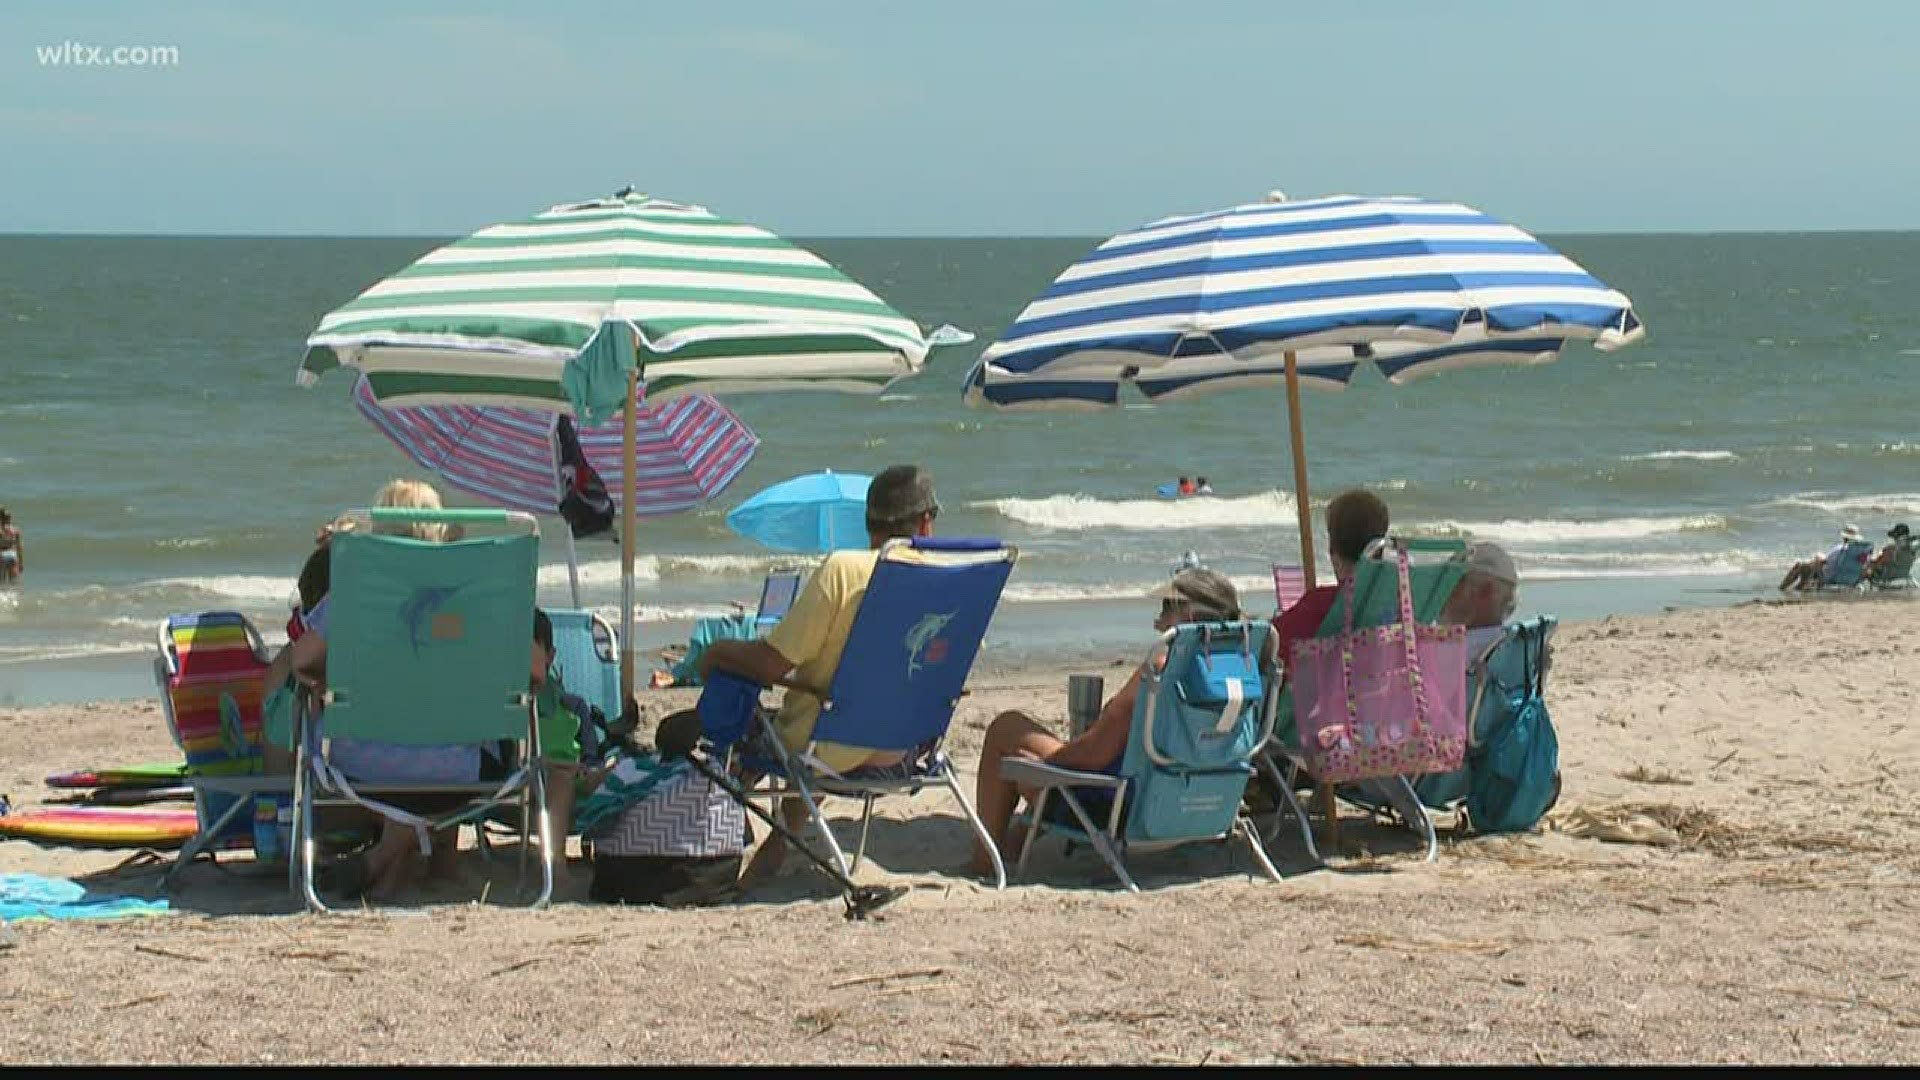 Some South Carolina beaches are opting to stay shuttered due to concerns amid the coronavirus outbreak.